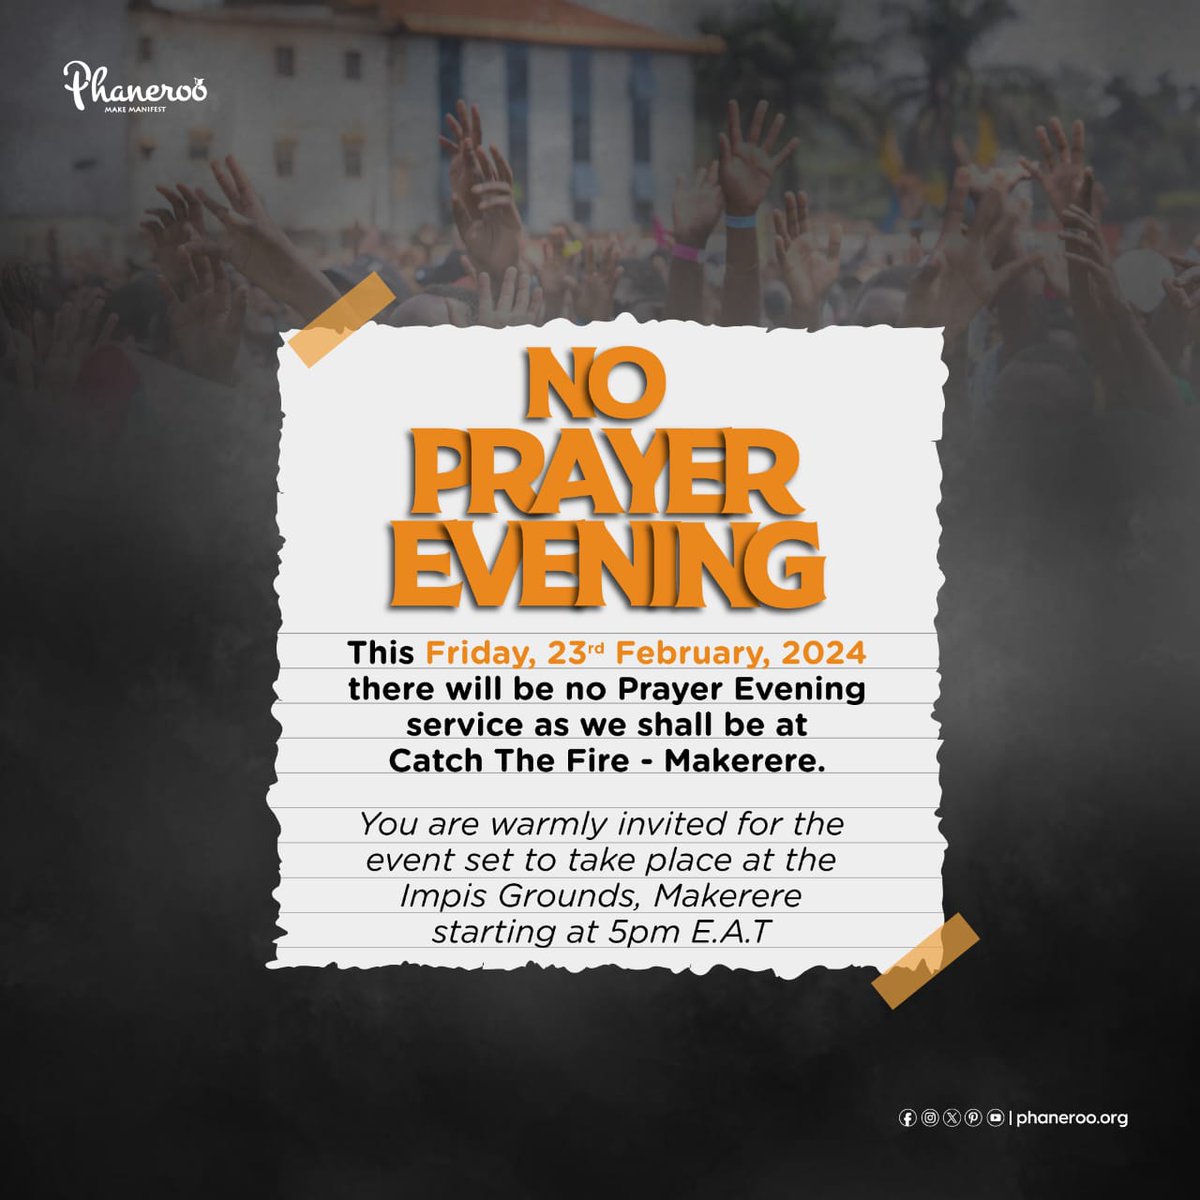 This Friday, 23rd February, 2024 there will be NO PRAYER EVENING SERVICE as we shall be at Catch The Fire - Makerere. ©️ Communications, PMI